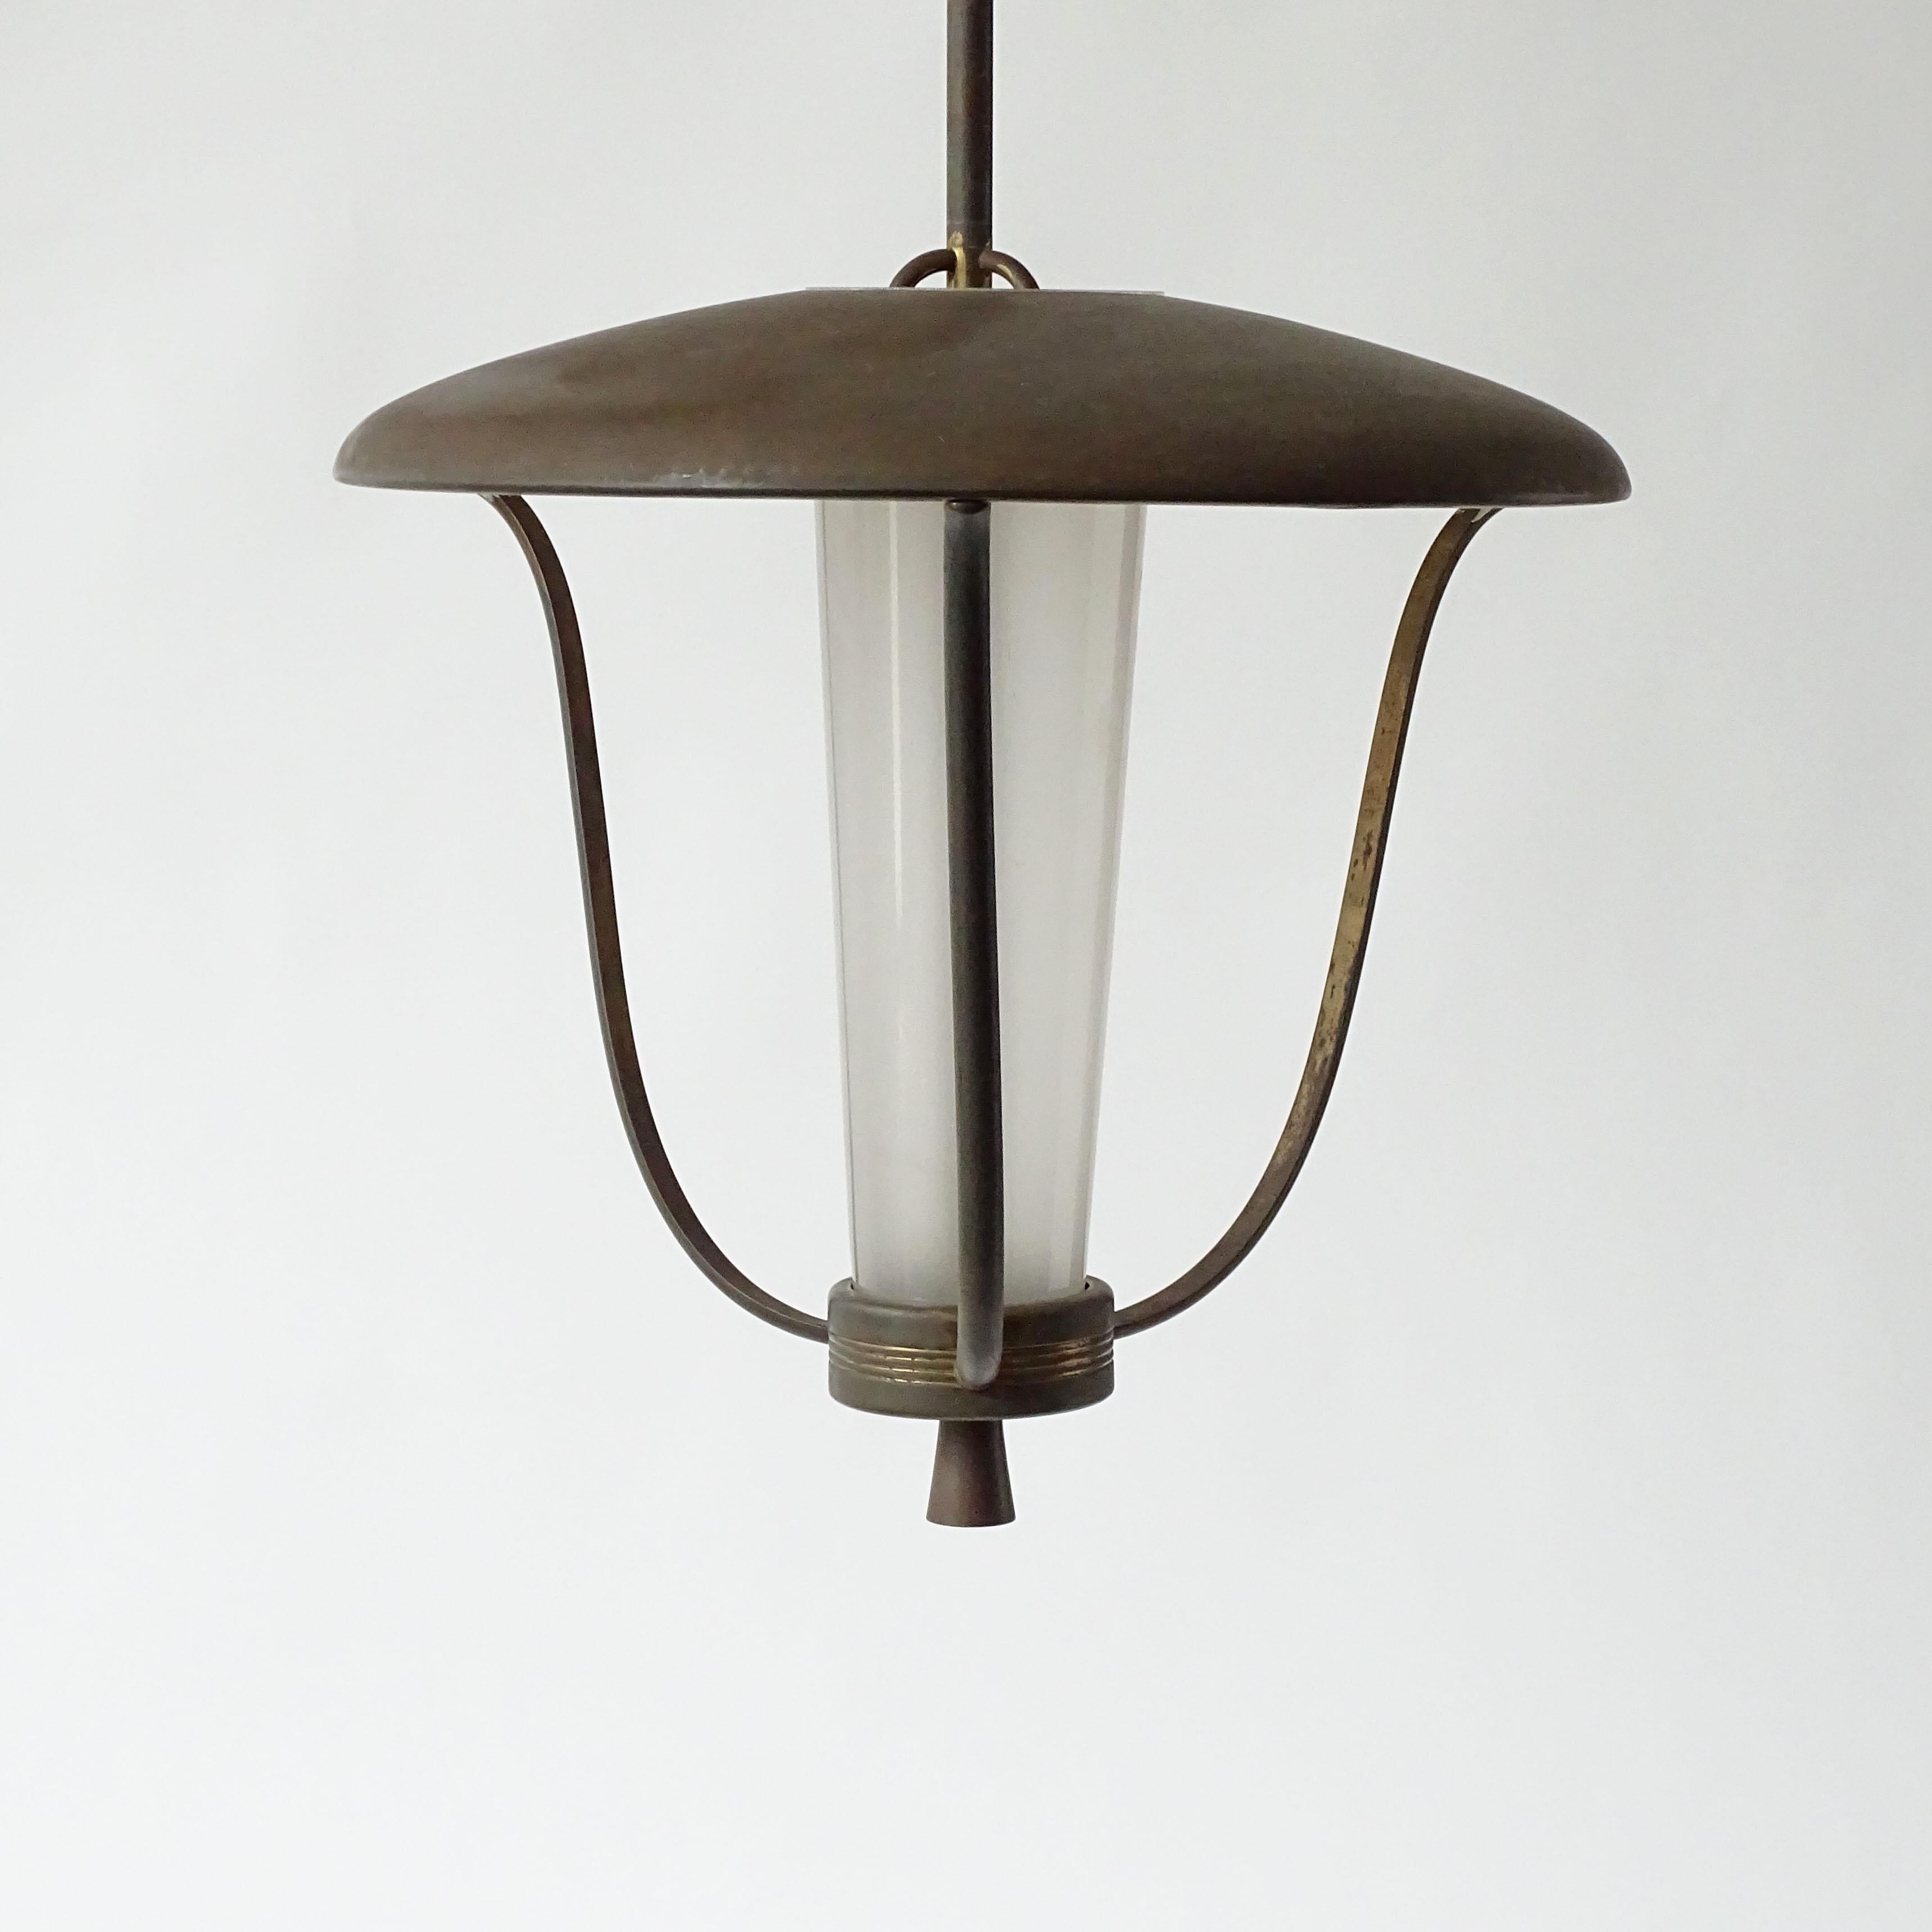 Splendid Guglielmo Ulrich Suspension Lamp
Brass and sanded glass.
Carries three light bulbs
Italy 1940s
Reference: 
Guglielmo Ulrich by Luca Scacchetti / Federico Motta Editore p. 142